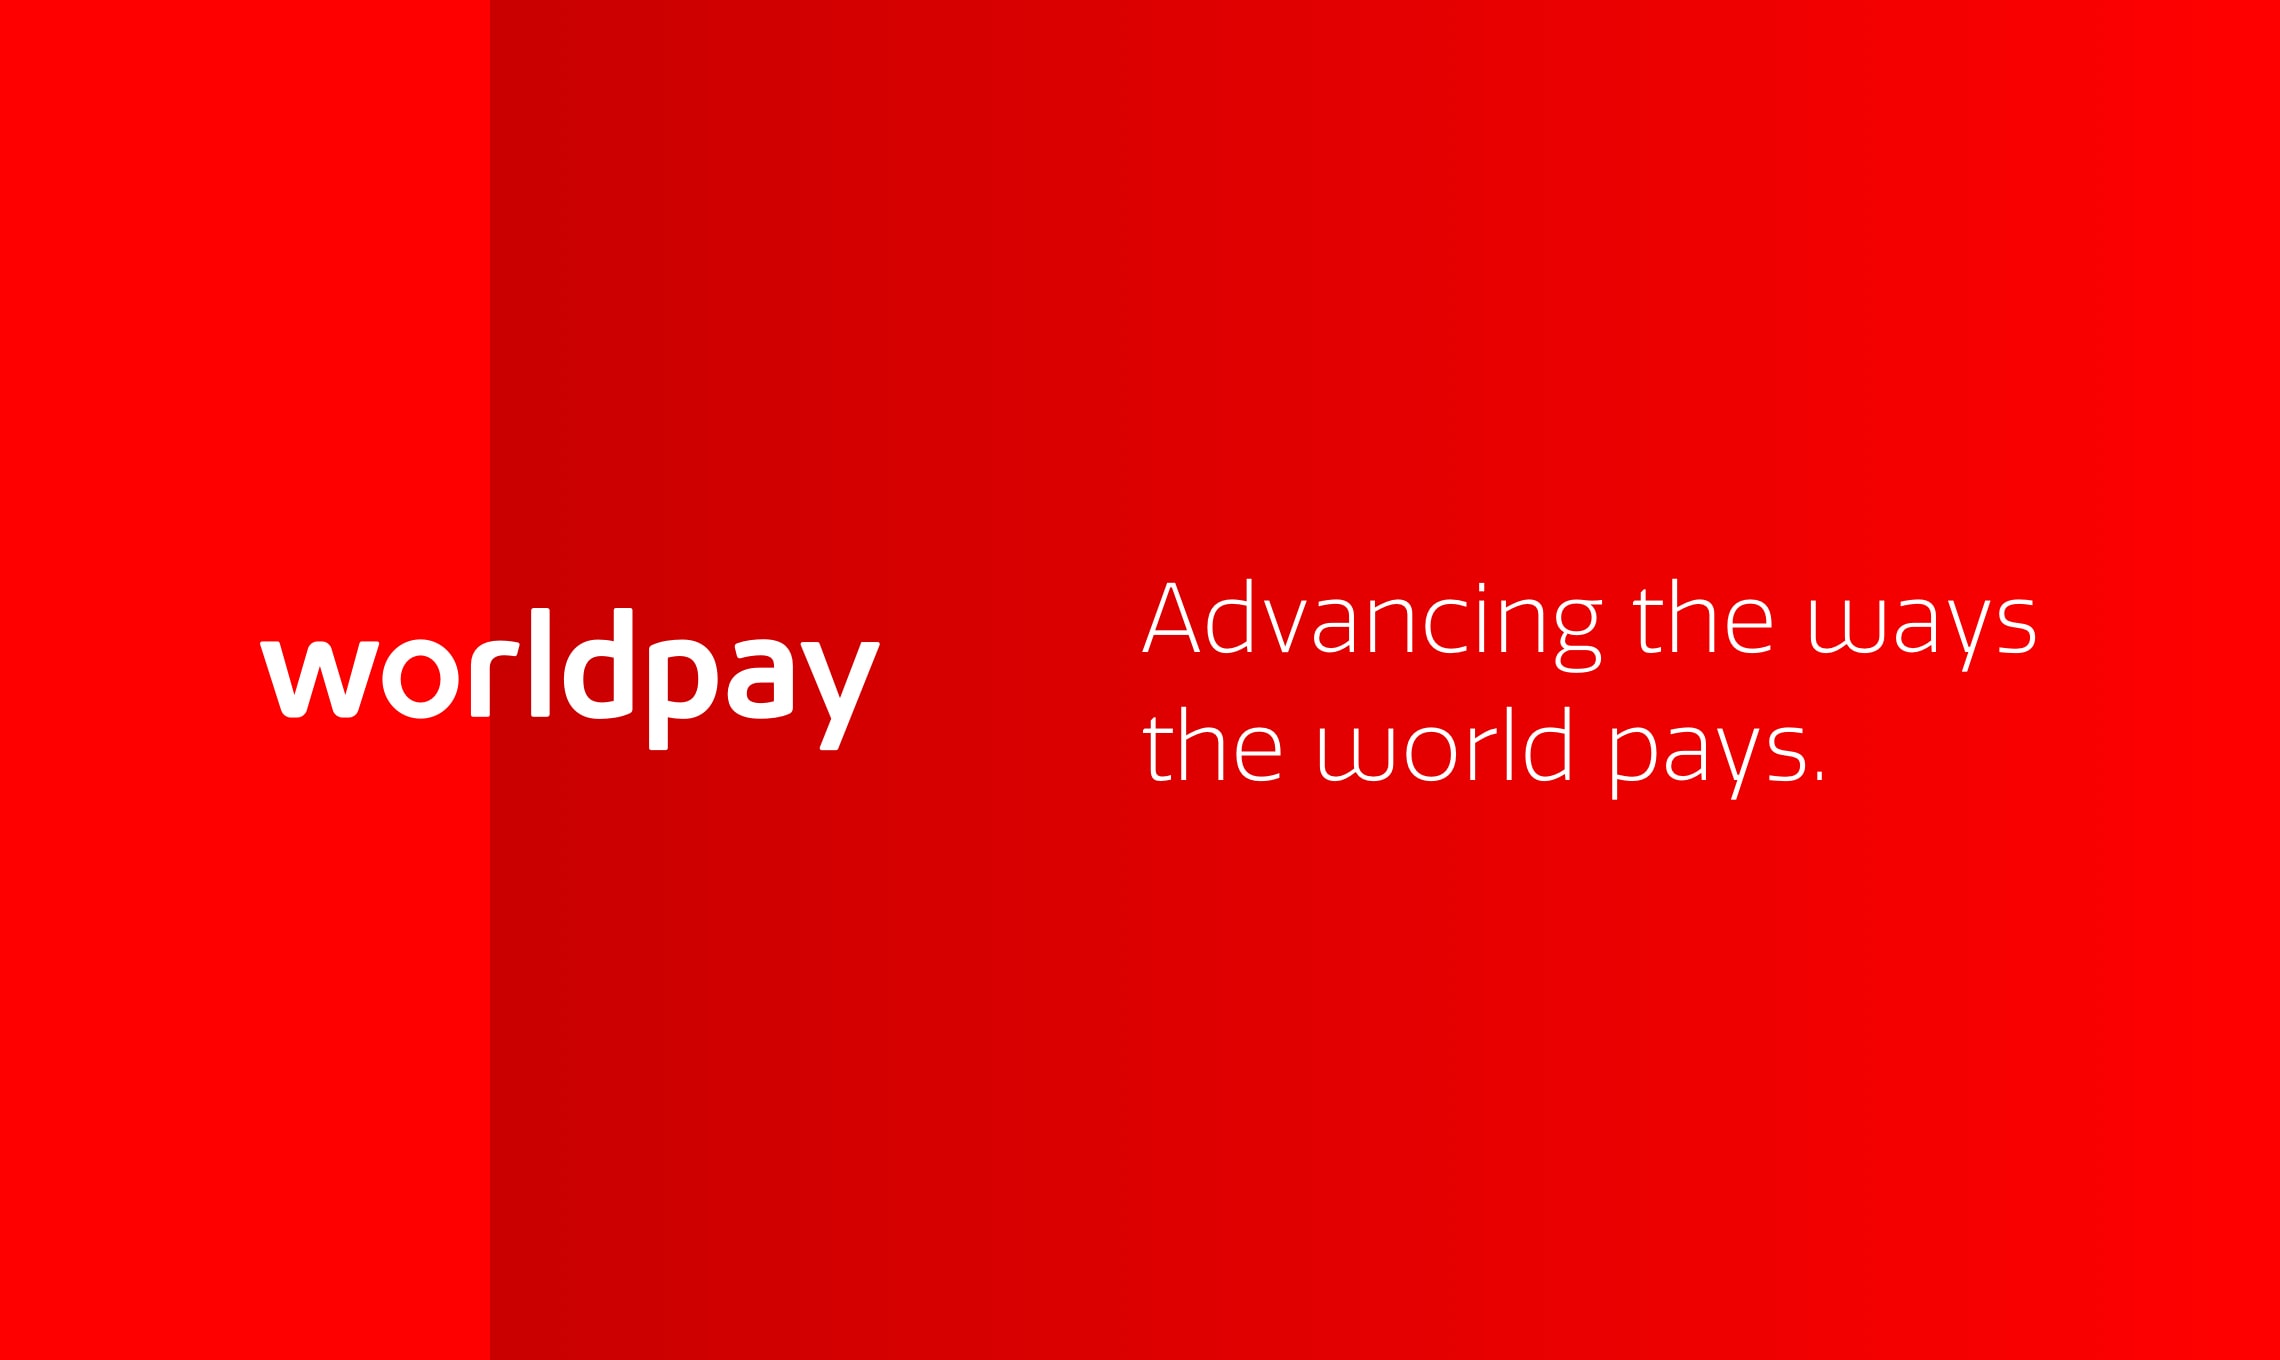 Worldpay - advancing the ways the world pays.